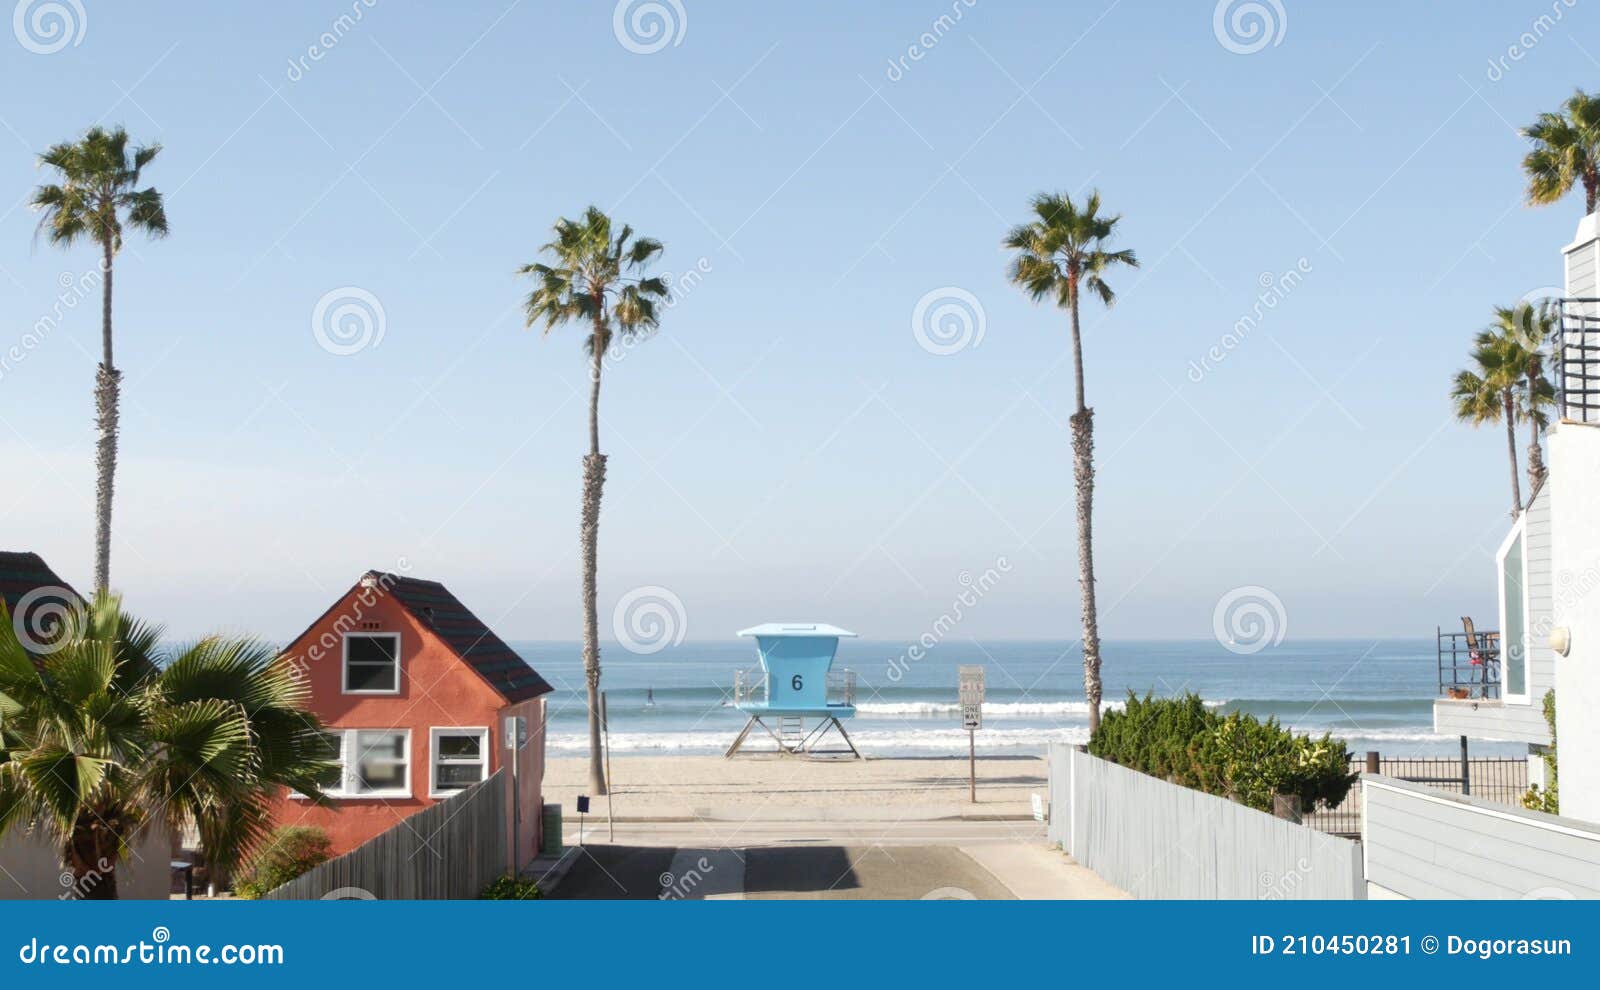 cottages in oceanside california usa. beachfront bungalows. ocean beach palm trees. lifeguard tower.